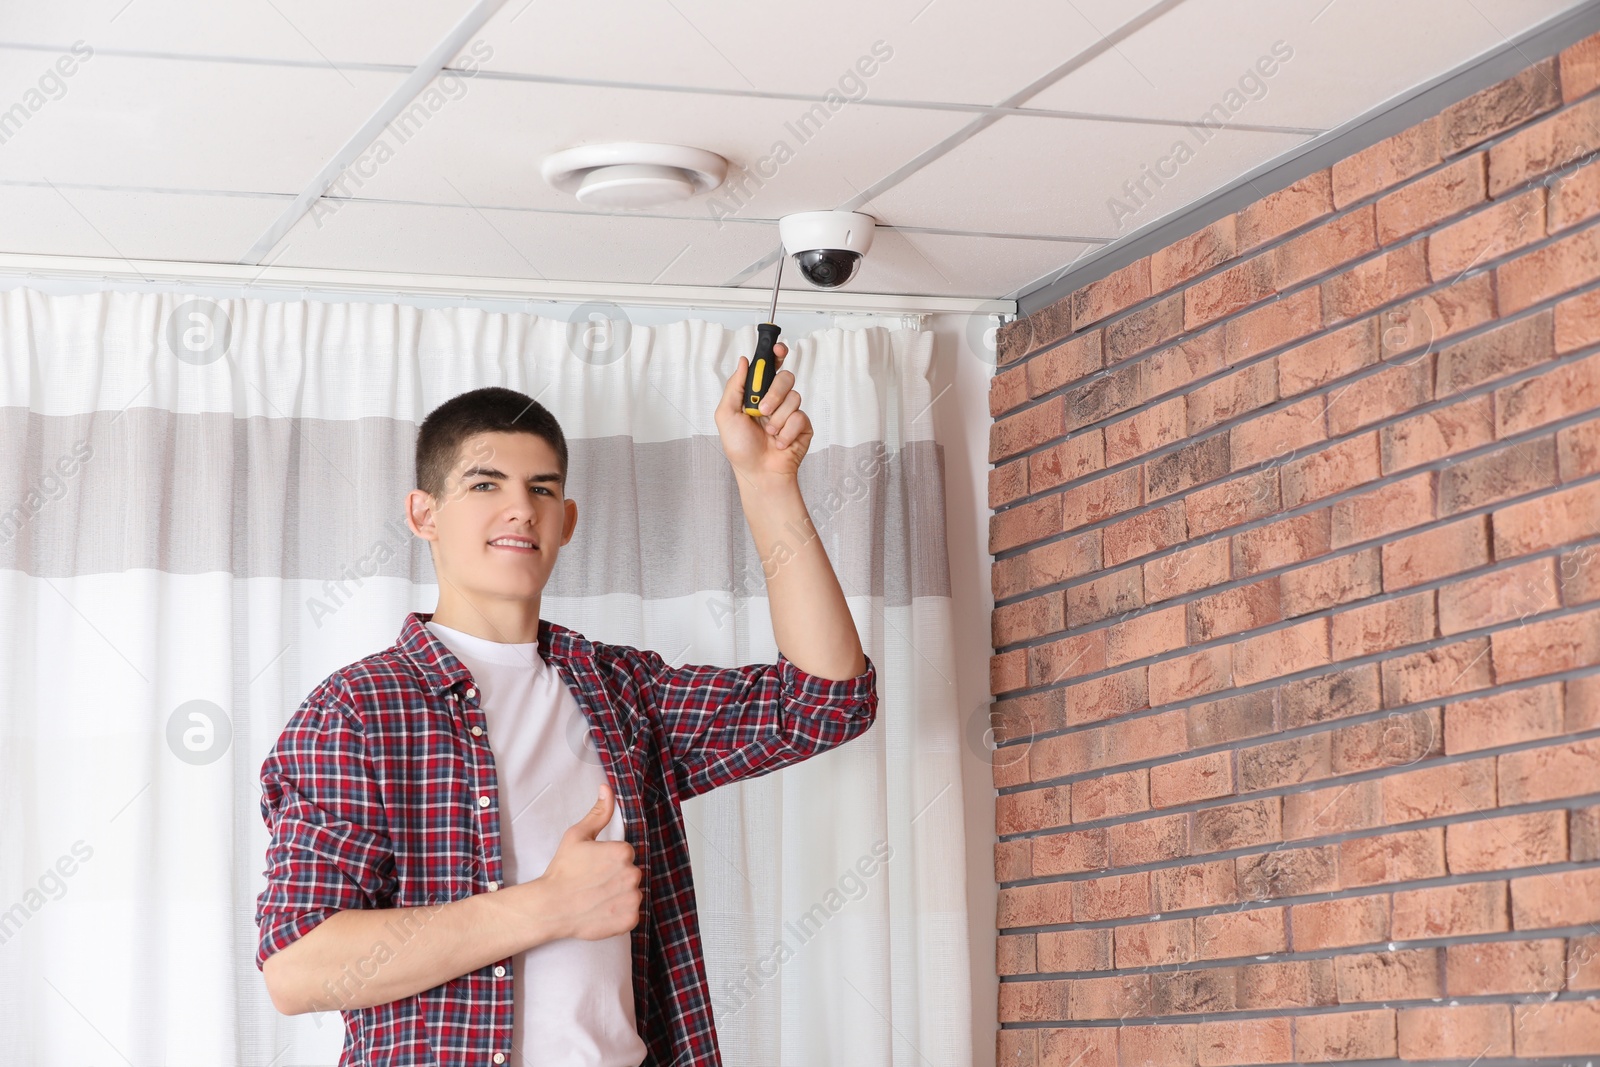 Photo of Technician showing thumbs up while installing CCTV camera with screwdriver on ceiling indoors